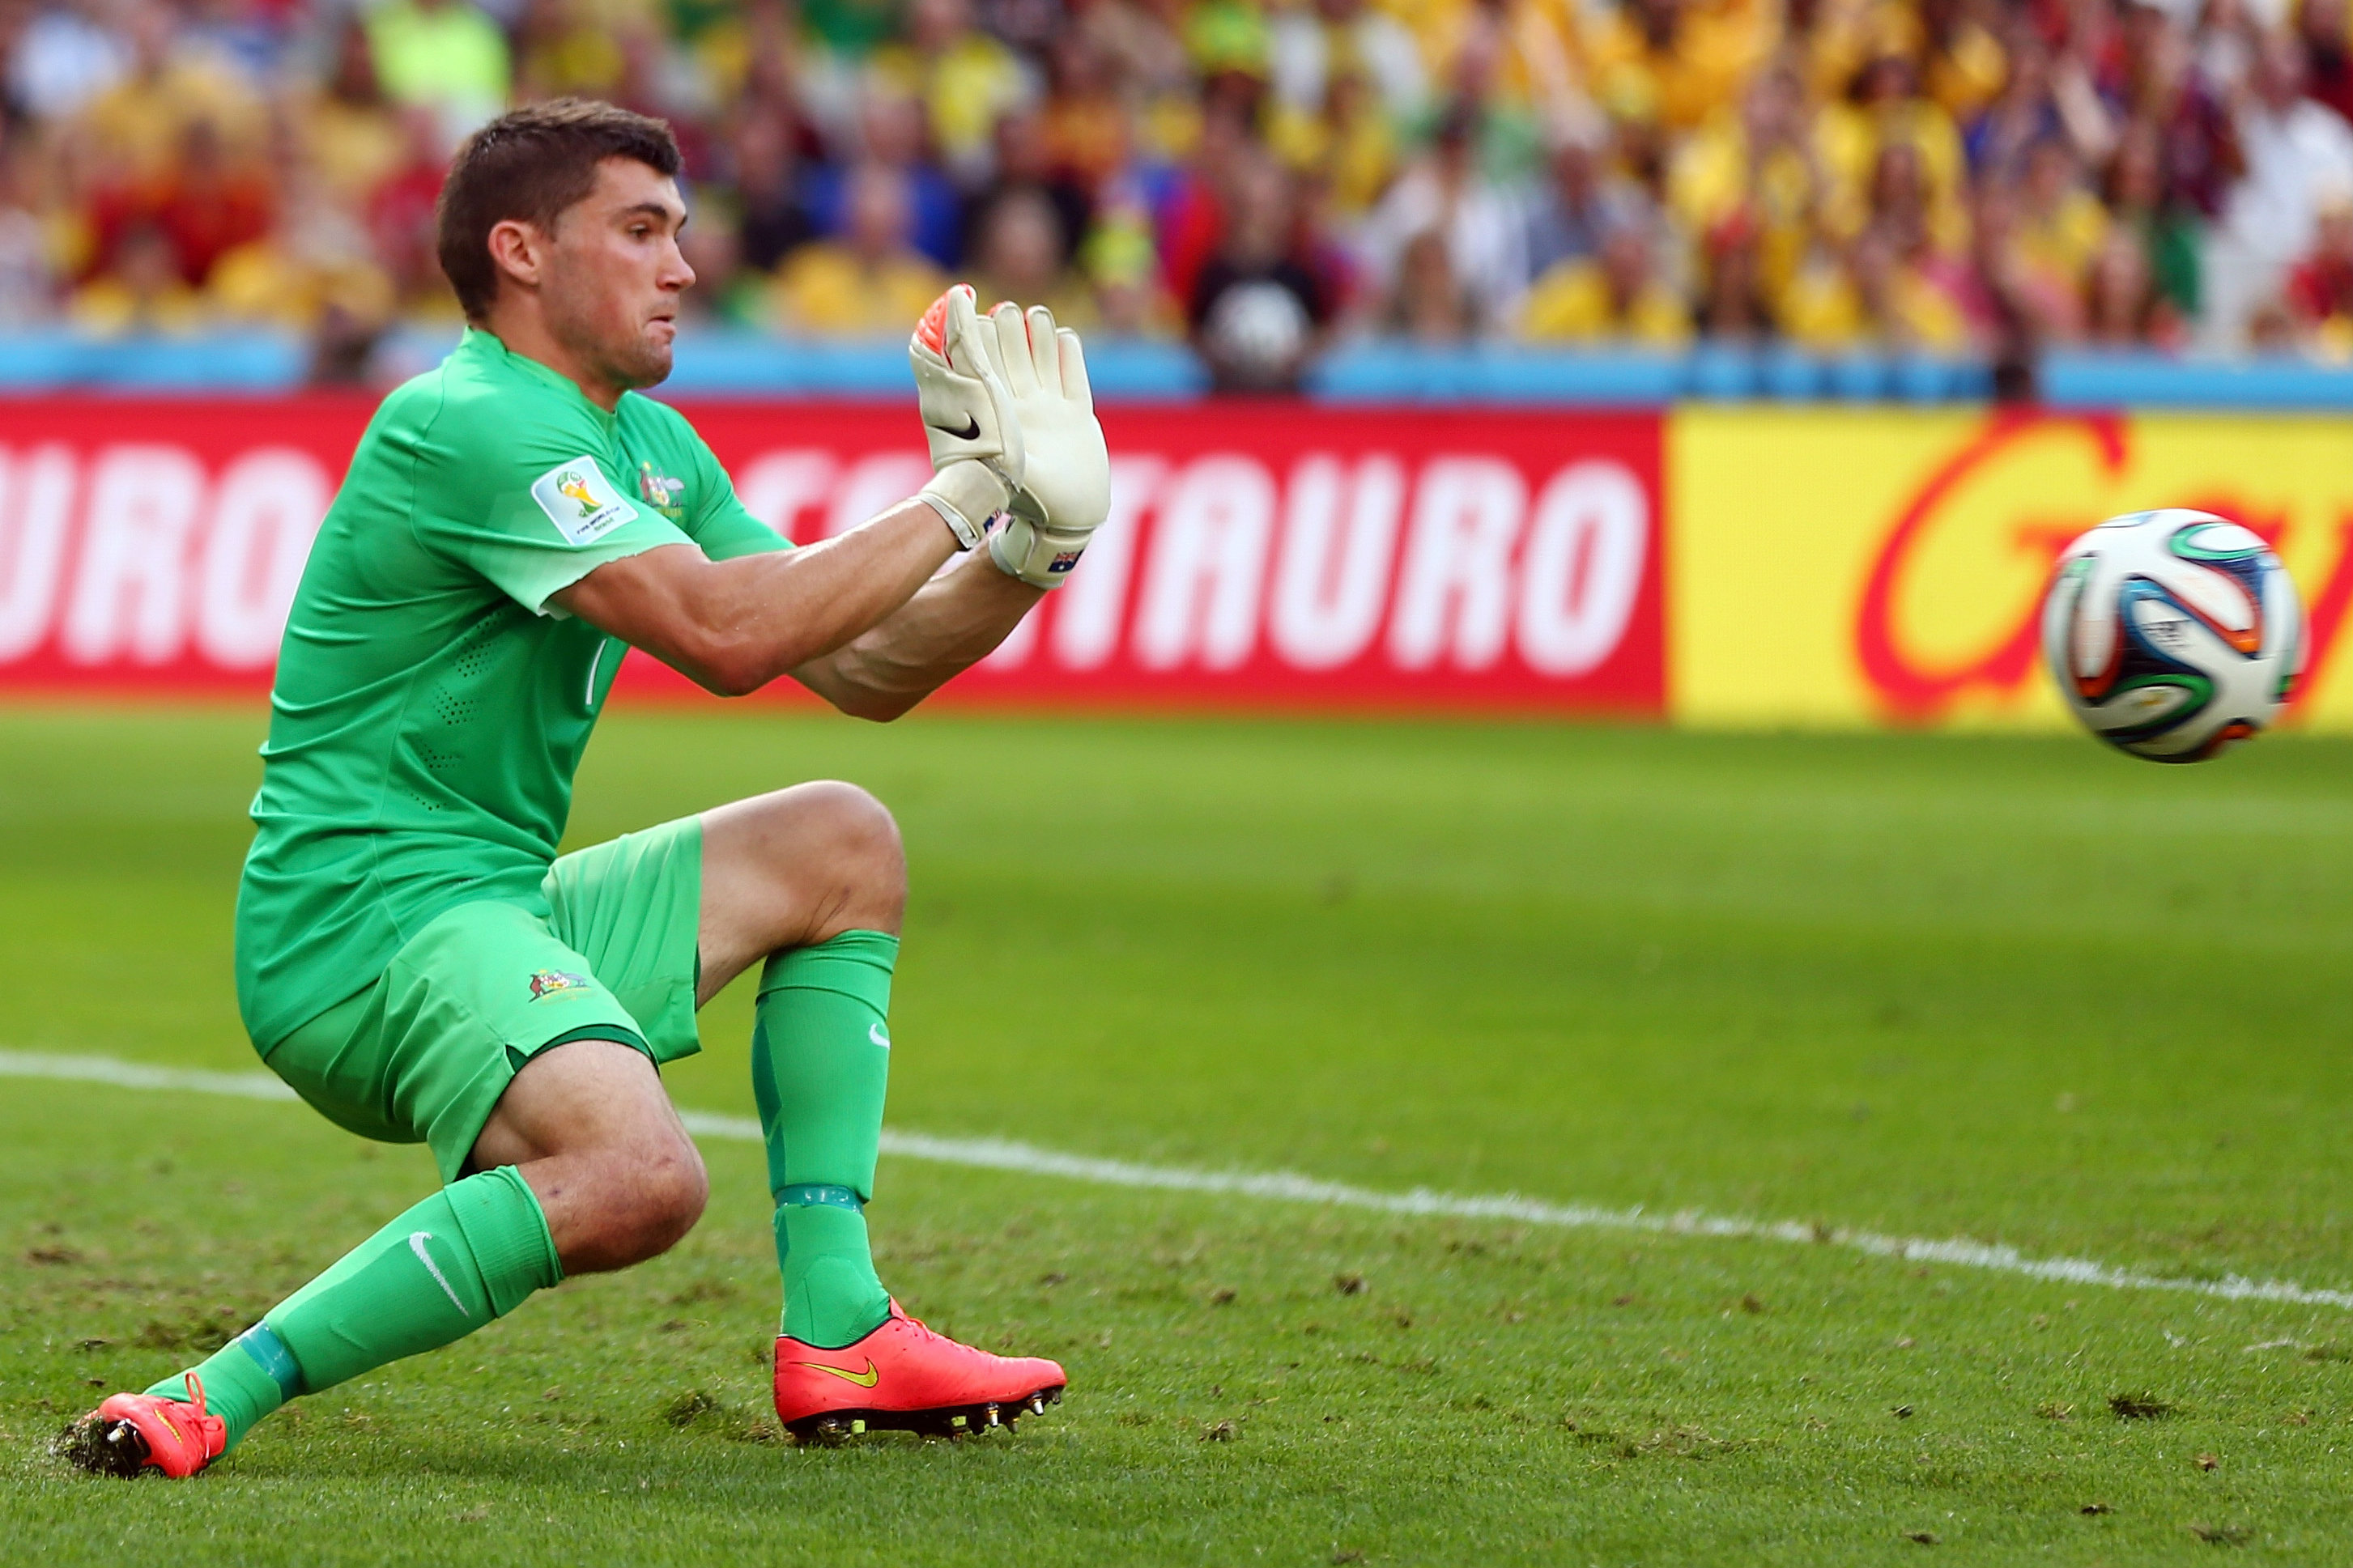 Mat Ryan makes a save against Spain at the 2014 World Cup.